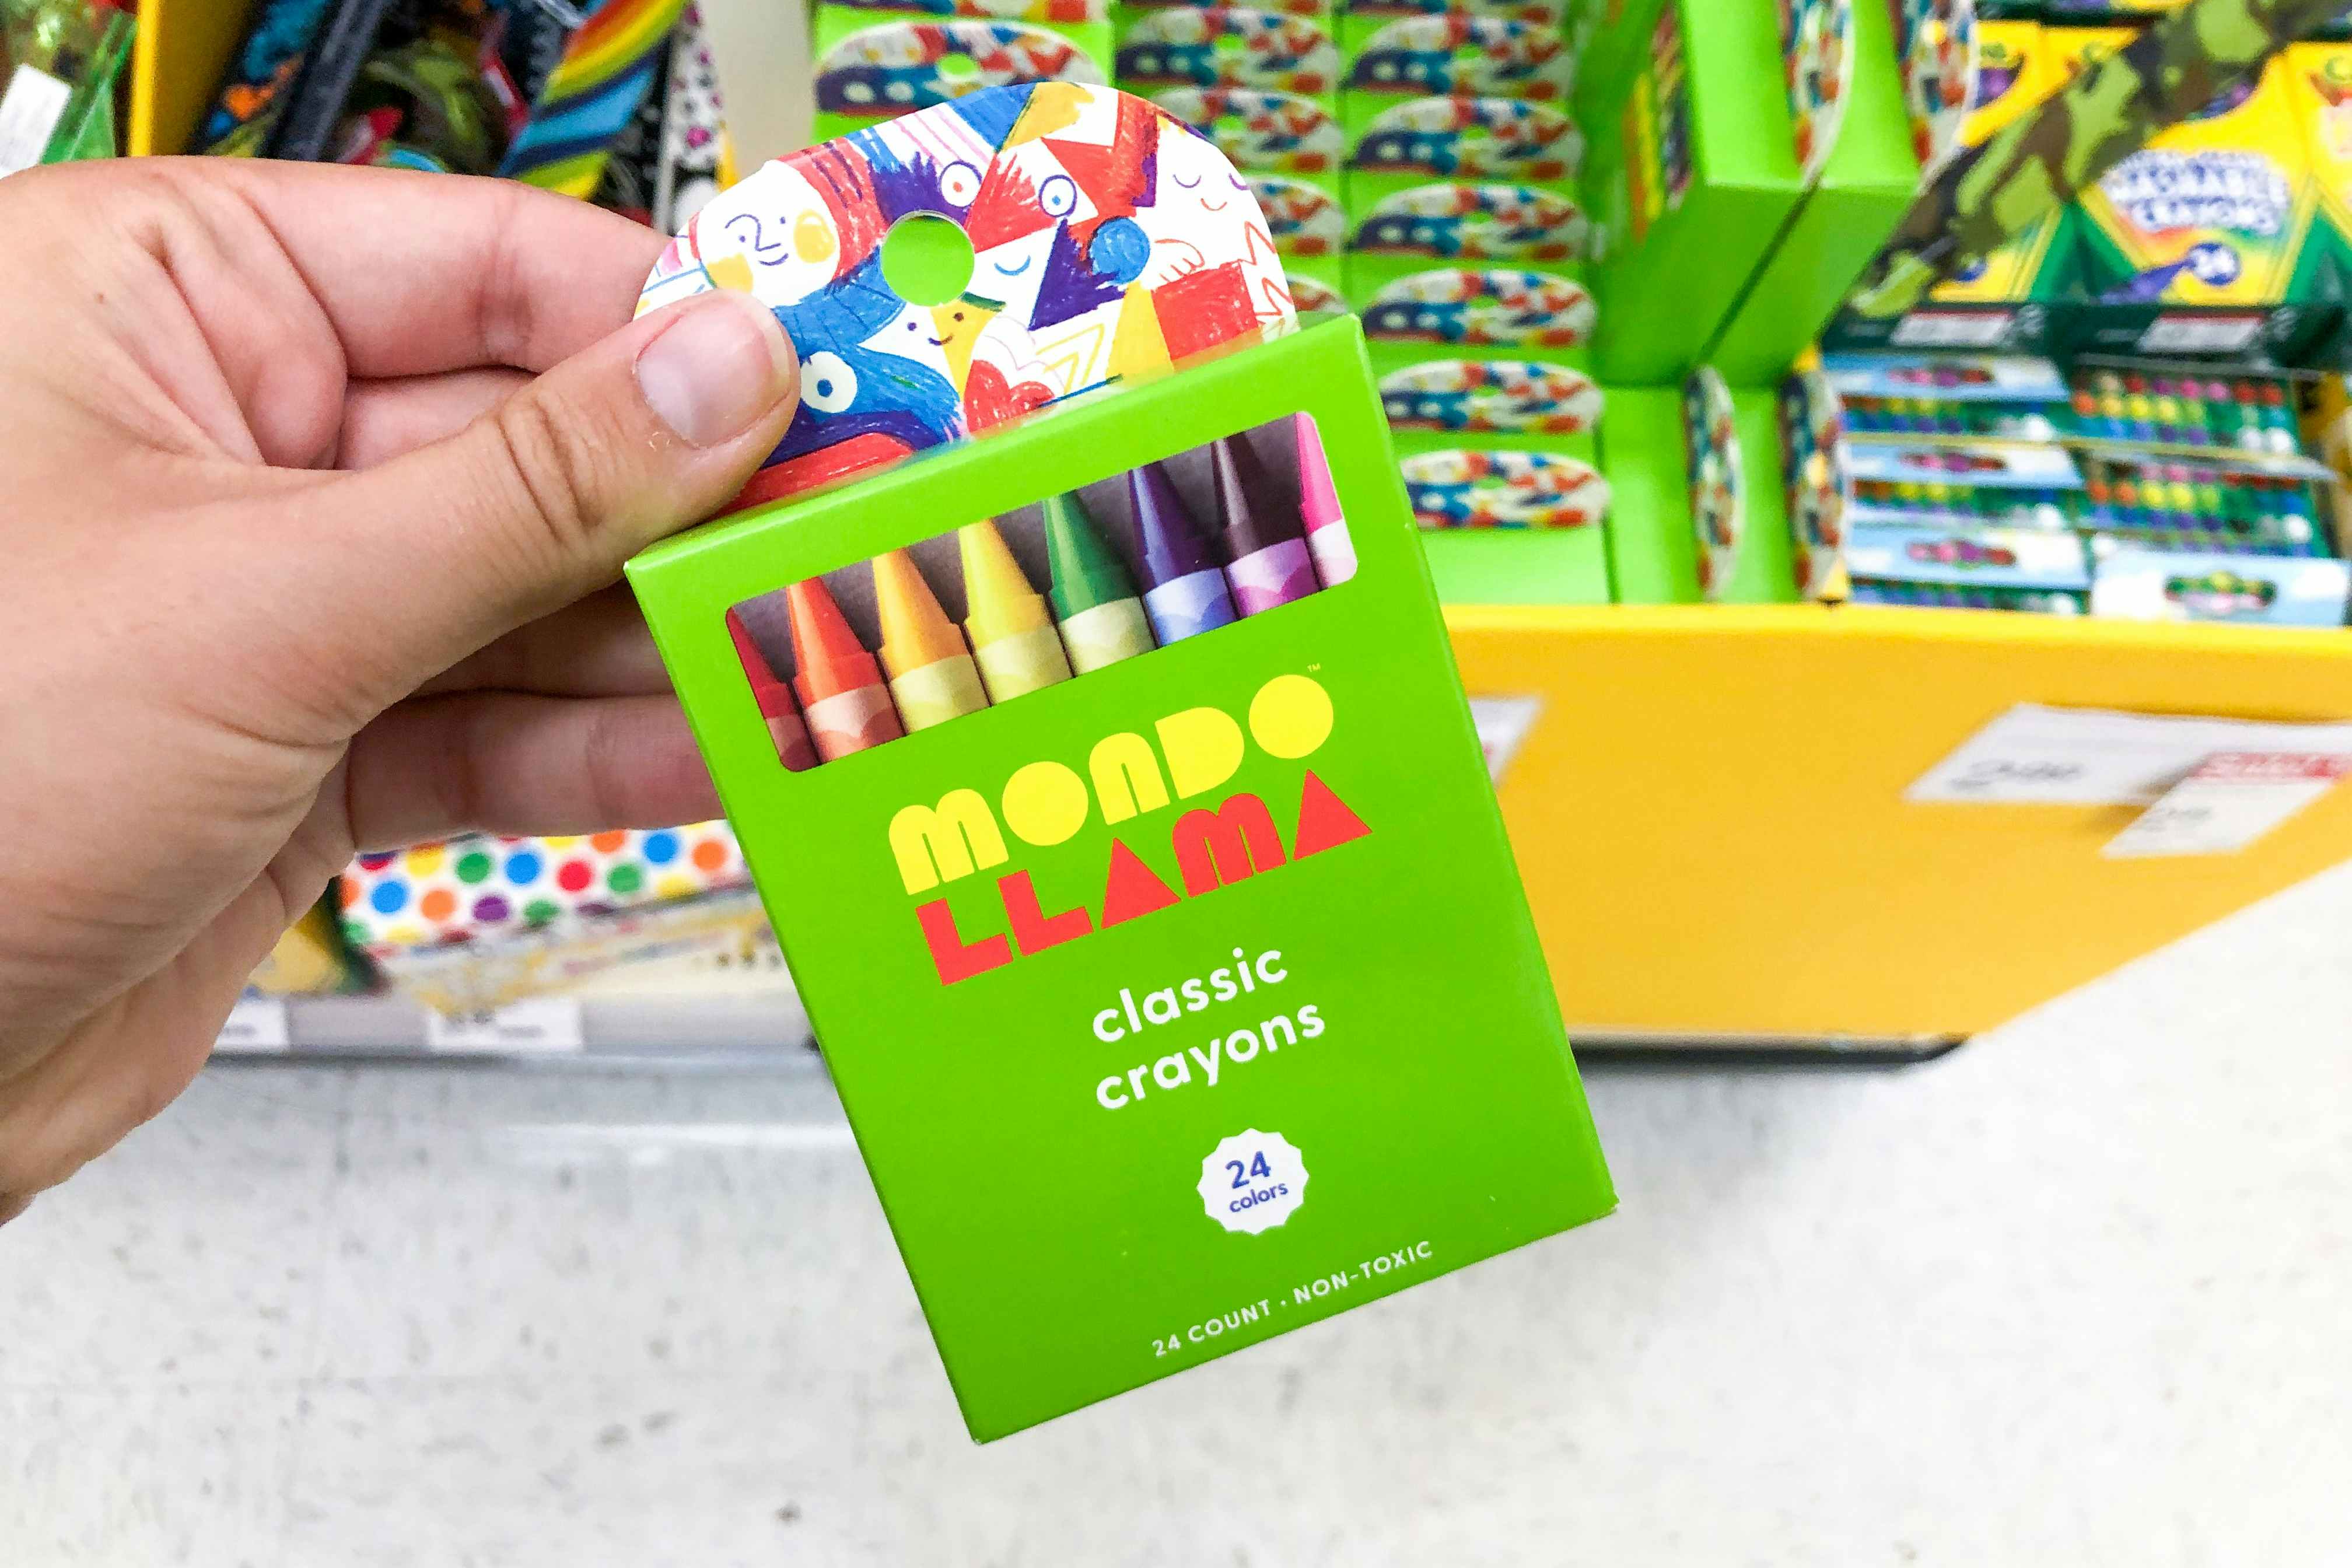 School Supplies on Sale at Target: $0.24 Crayons or Glue, $0.47 Markers